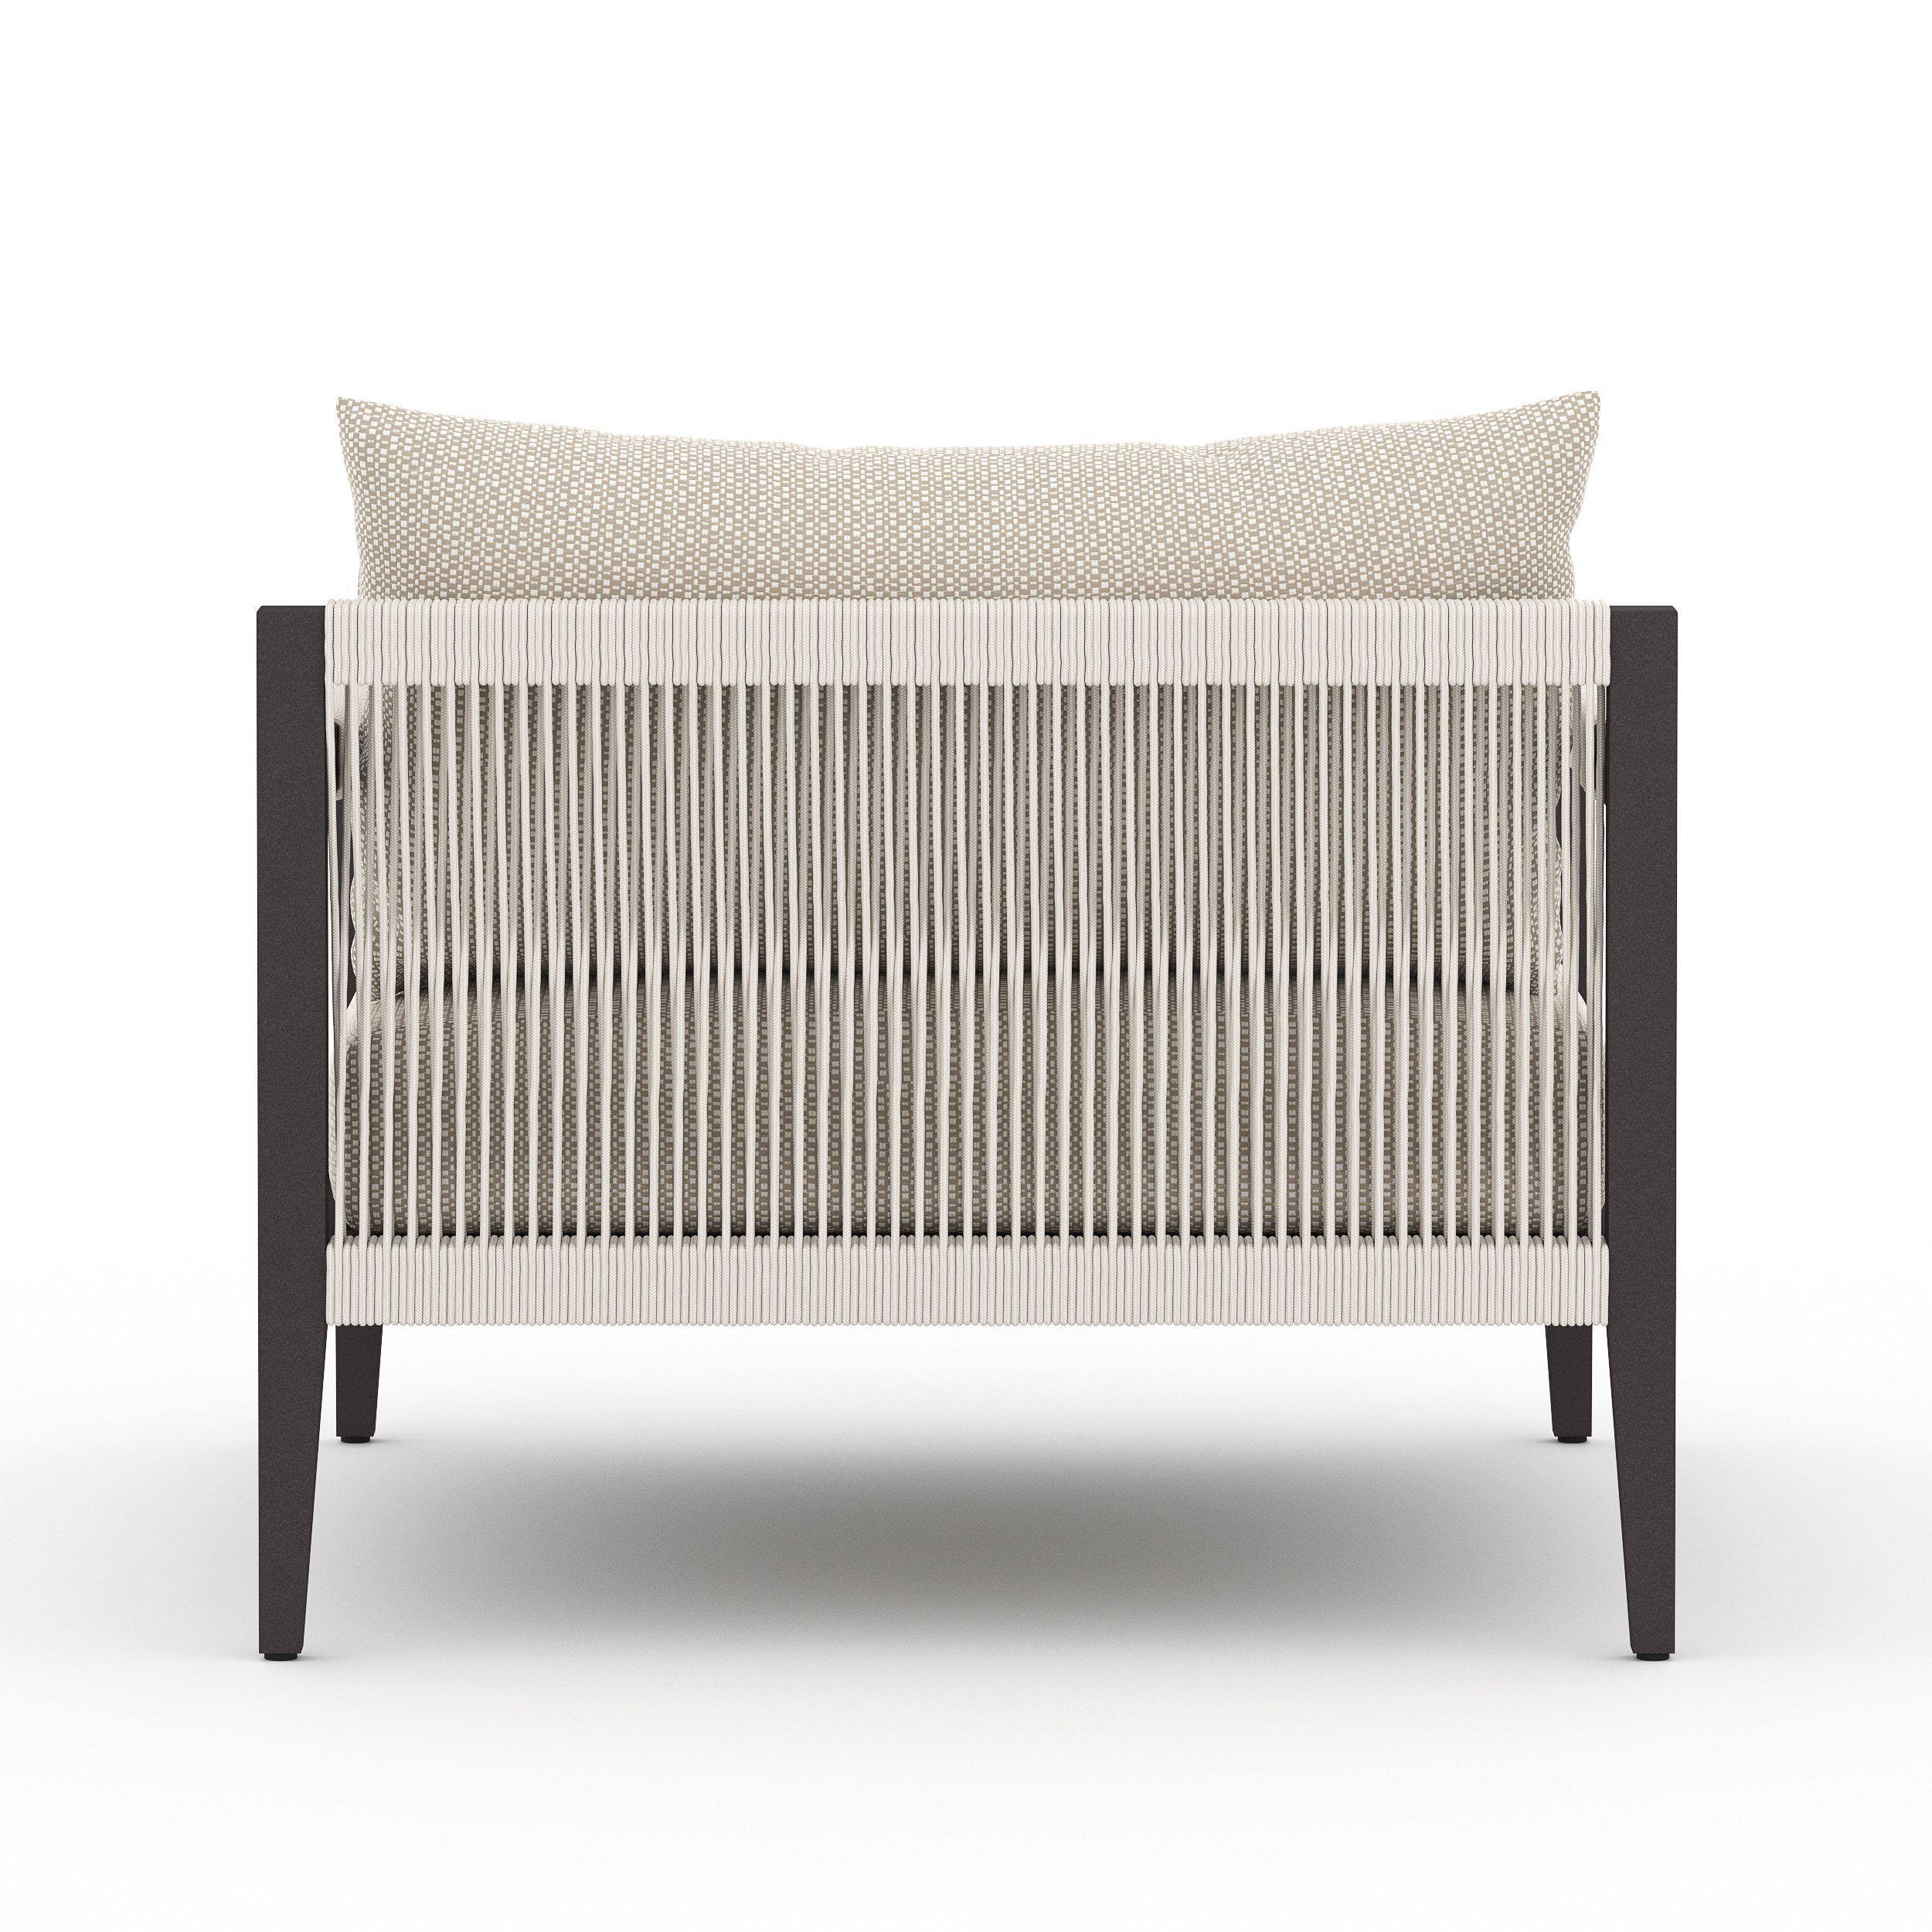 Four Hands FURNITURE - Albers Outdoor Chair - Bronze Frame